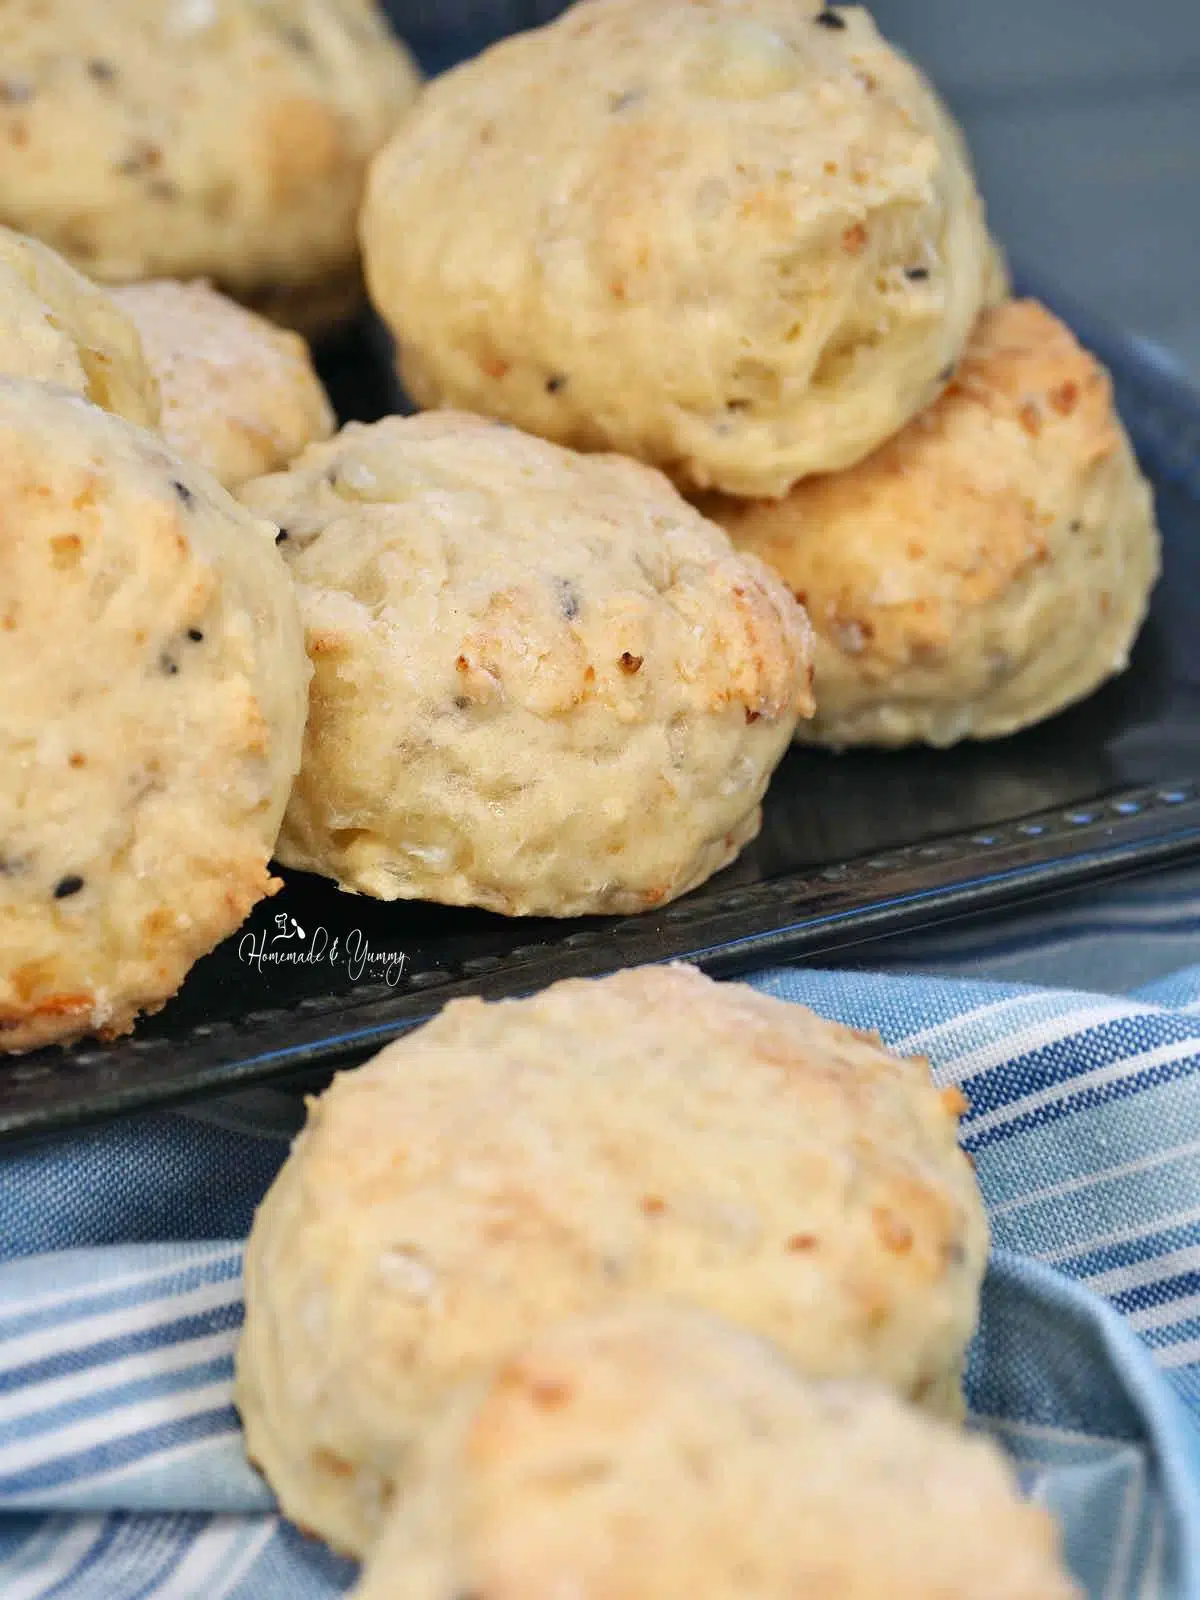 Everything Cottage Cheese Biscuits ready to eat.